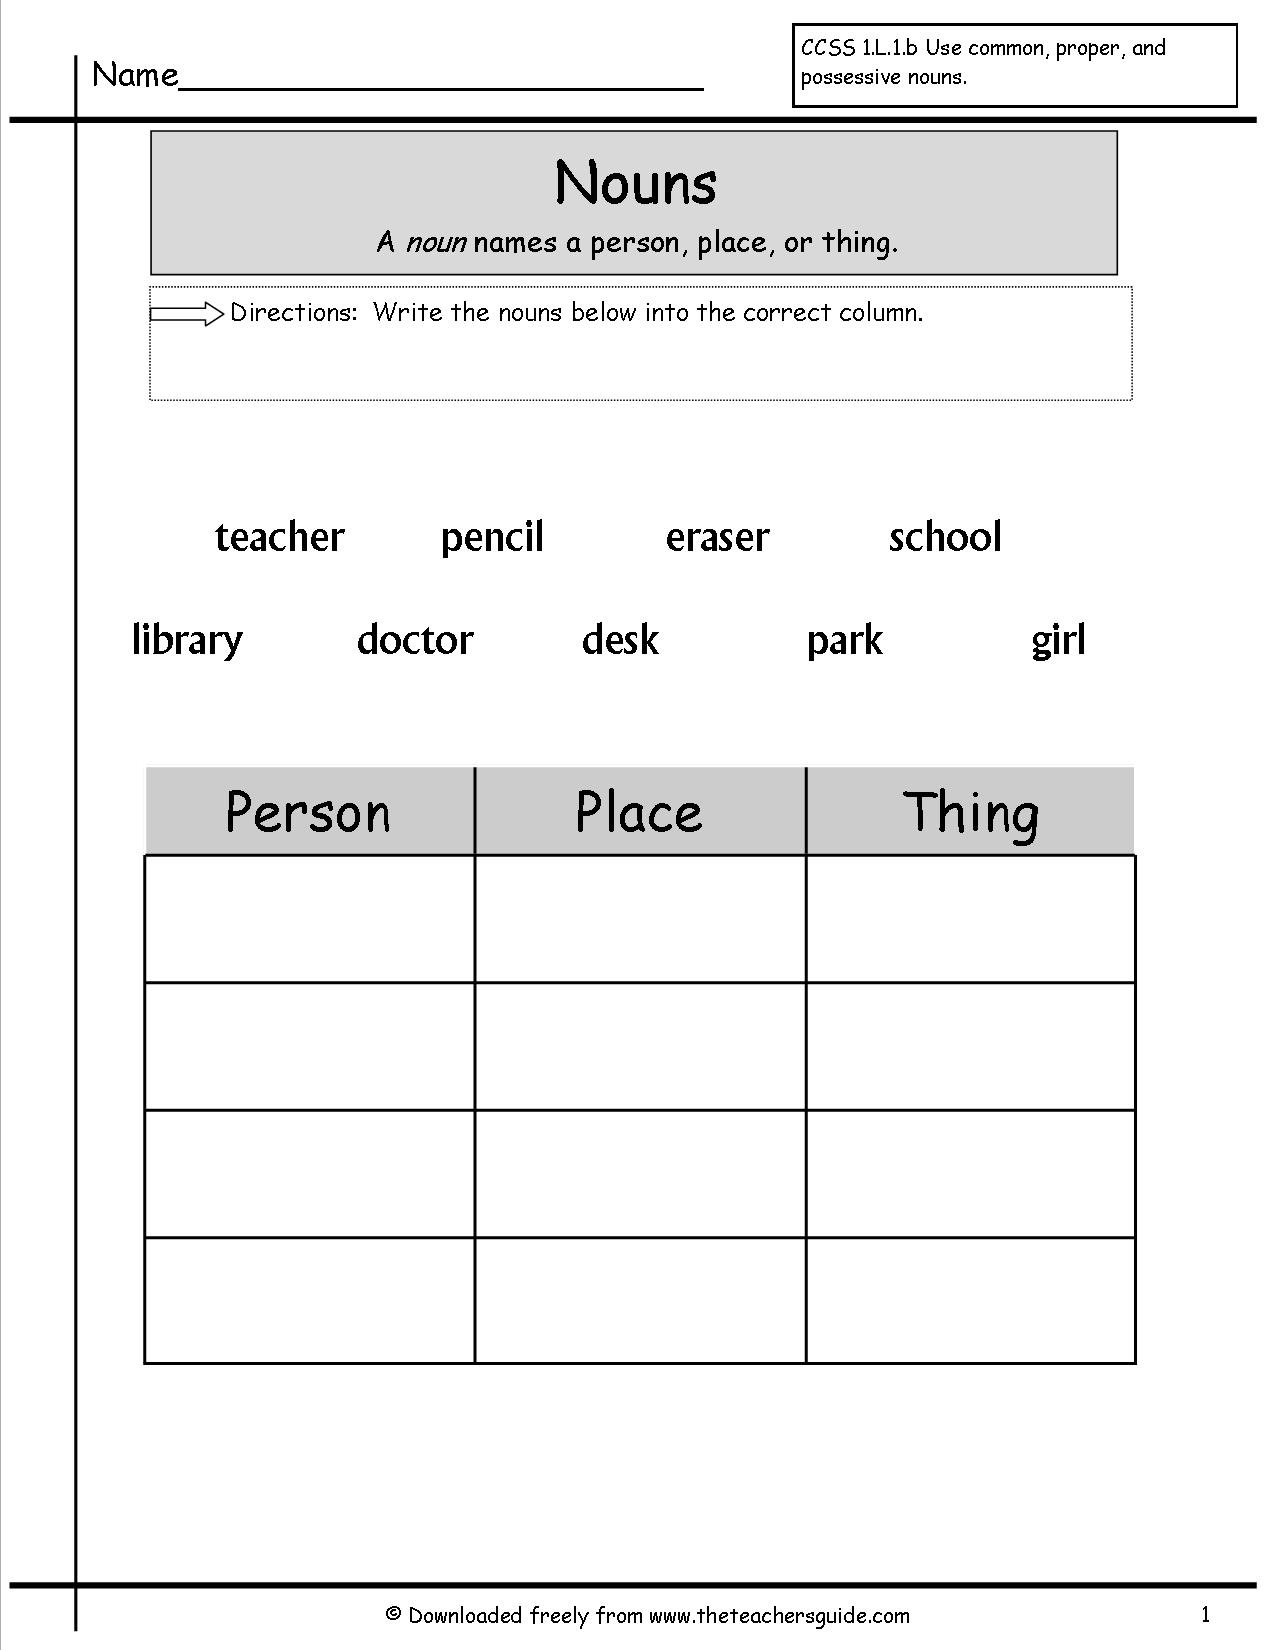 nouns-worksheets-for-first-grade-nouns-worksheet-proper-nouns-worksheet-grammar-worksheets